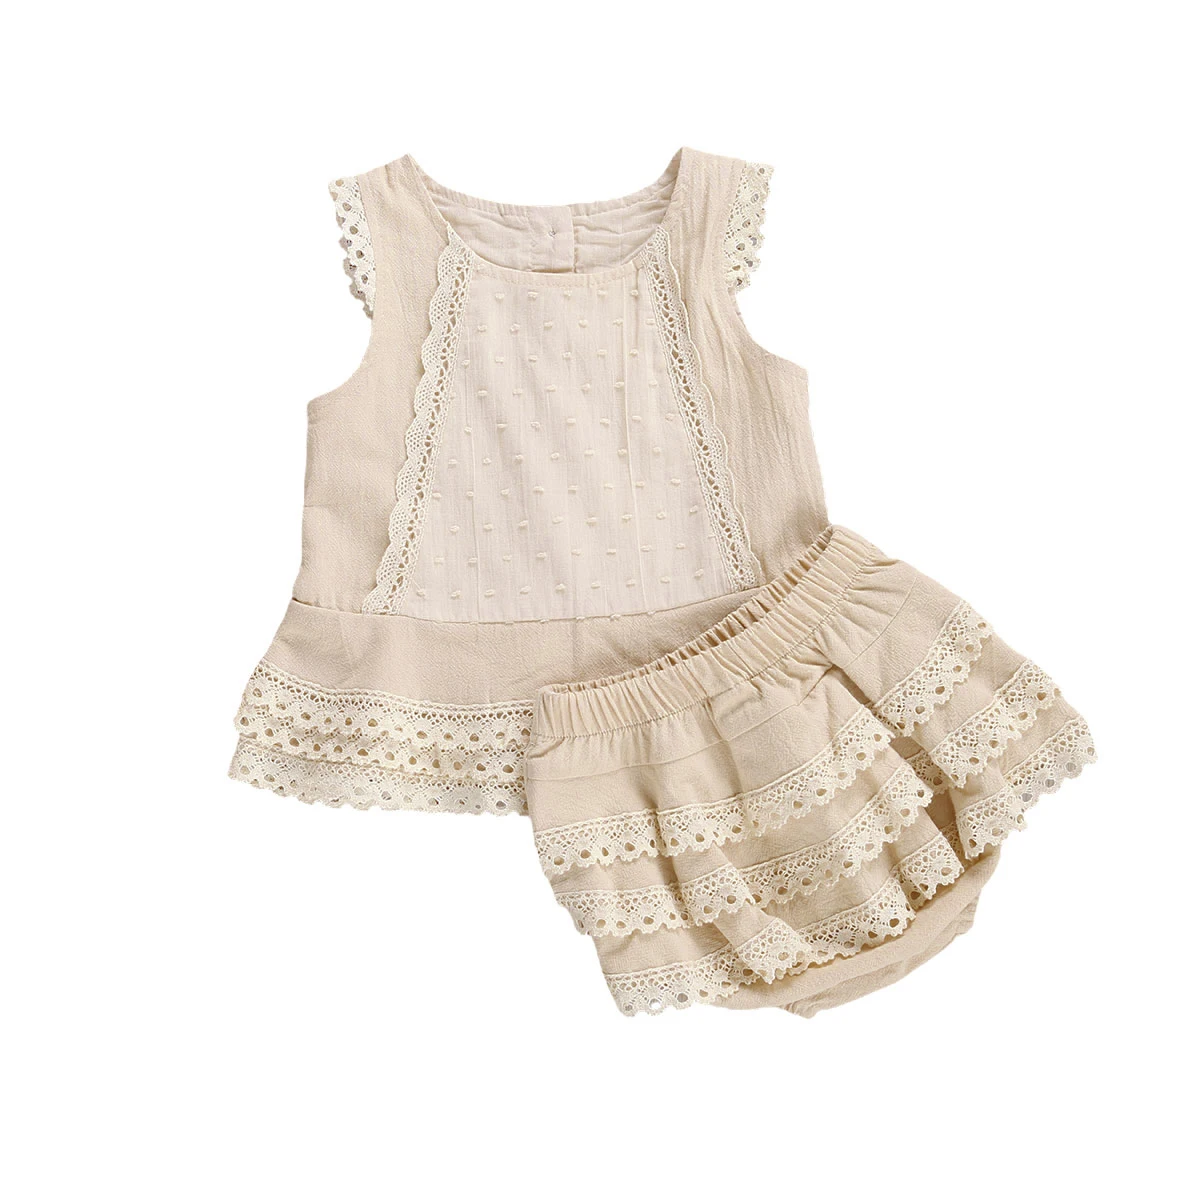 

Cute Baby Girls Clothes Summer Suit O-Neck Sleeveless Lace Vest Top with Layered Hem +Tiered Skirt Panty Outfit for Toddler Girl